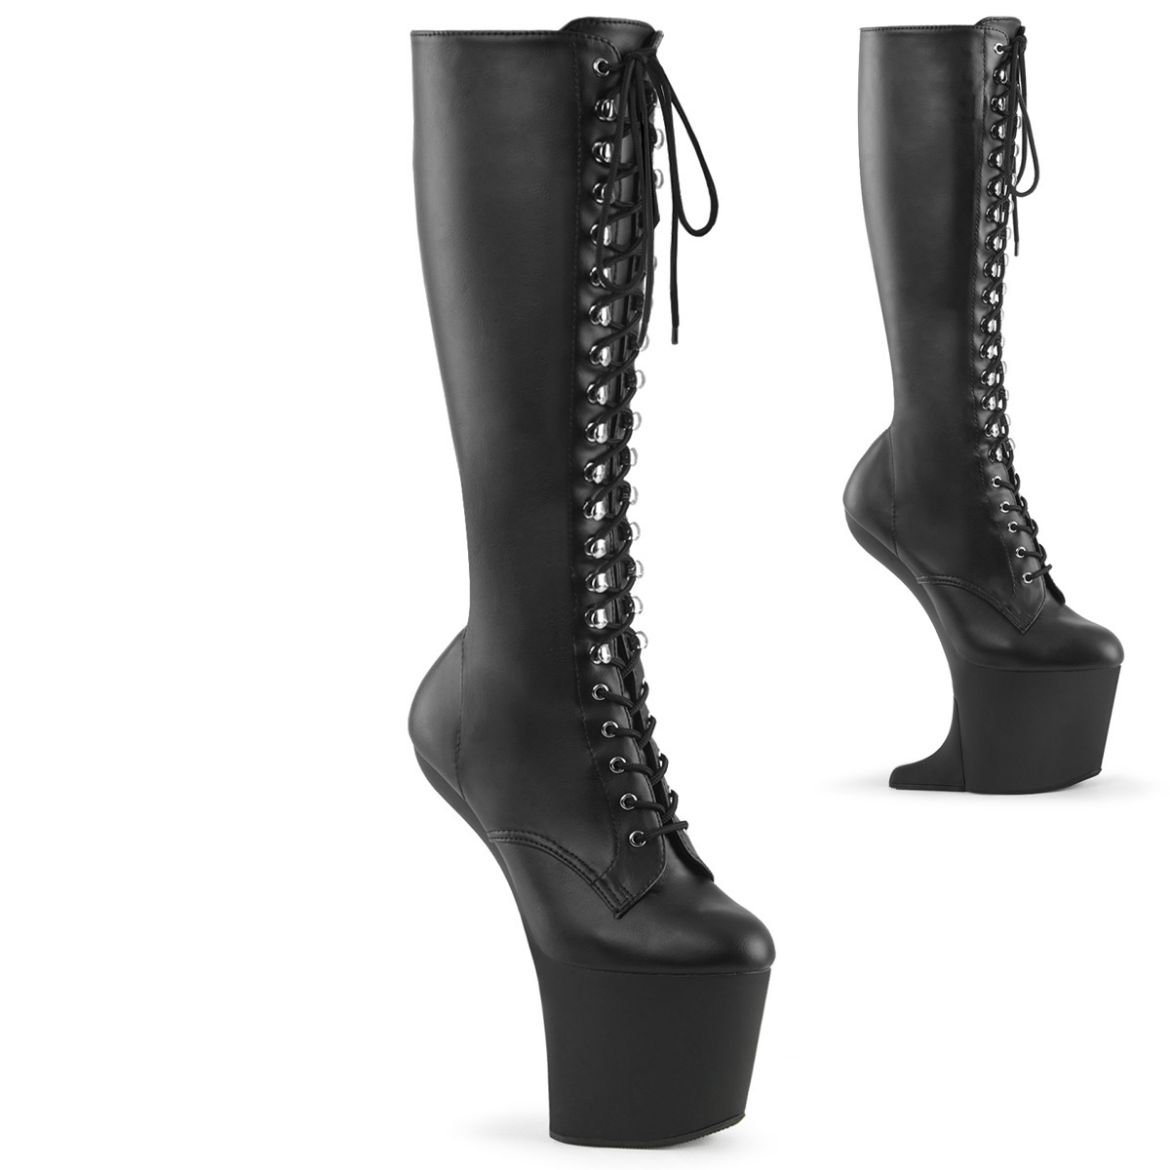 Product image of Pleaser CRAZE-2023 Blk Str. Faux Leather/Blk Matte 8 Inch Heelless 3 Inch PF Lace-Up Stretch Knee Boot Side Zip